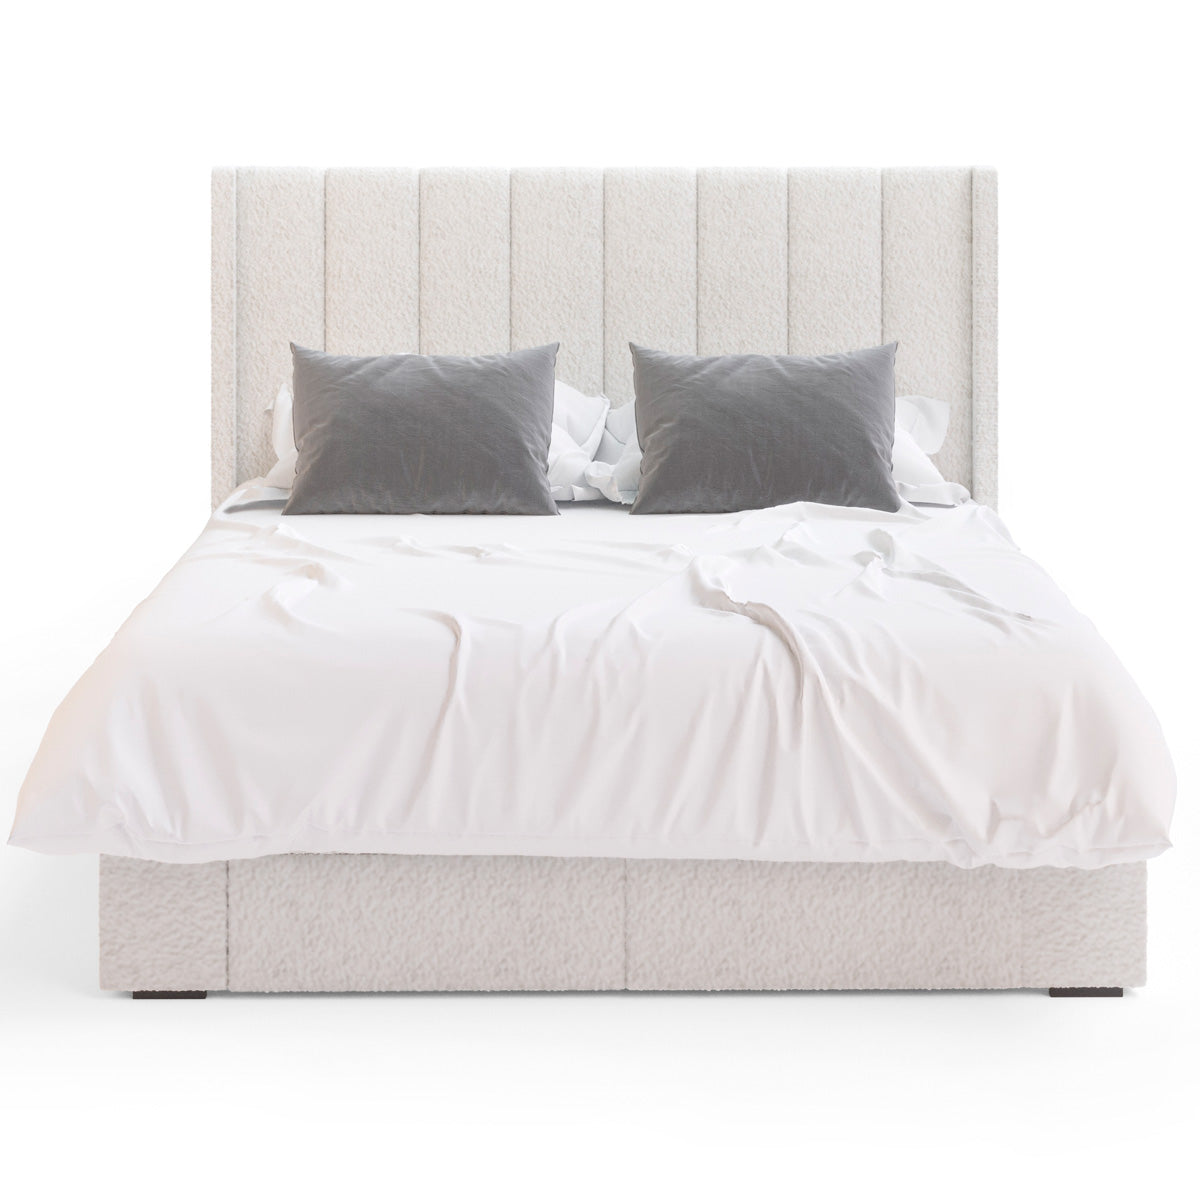 Emilie Winged Storage Bed Frame with Four Extra Large Drawers (Ivory White Boucle Fabric)